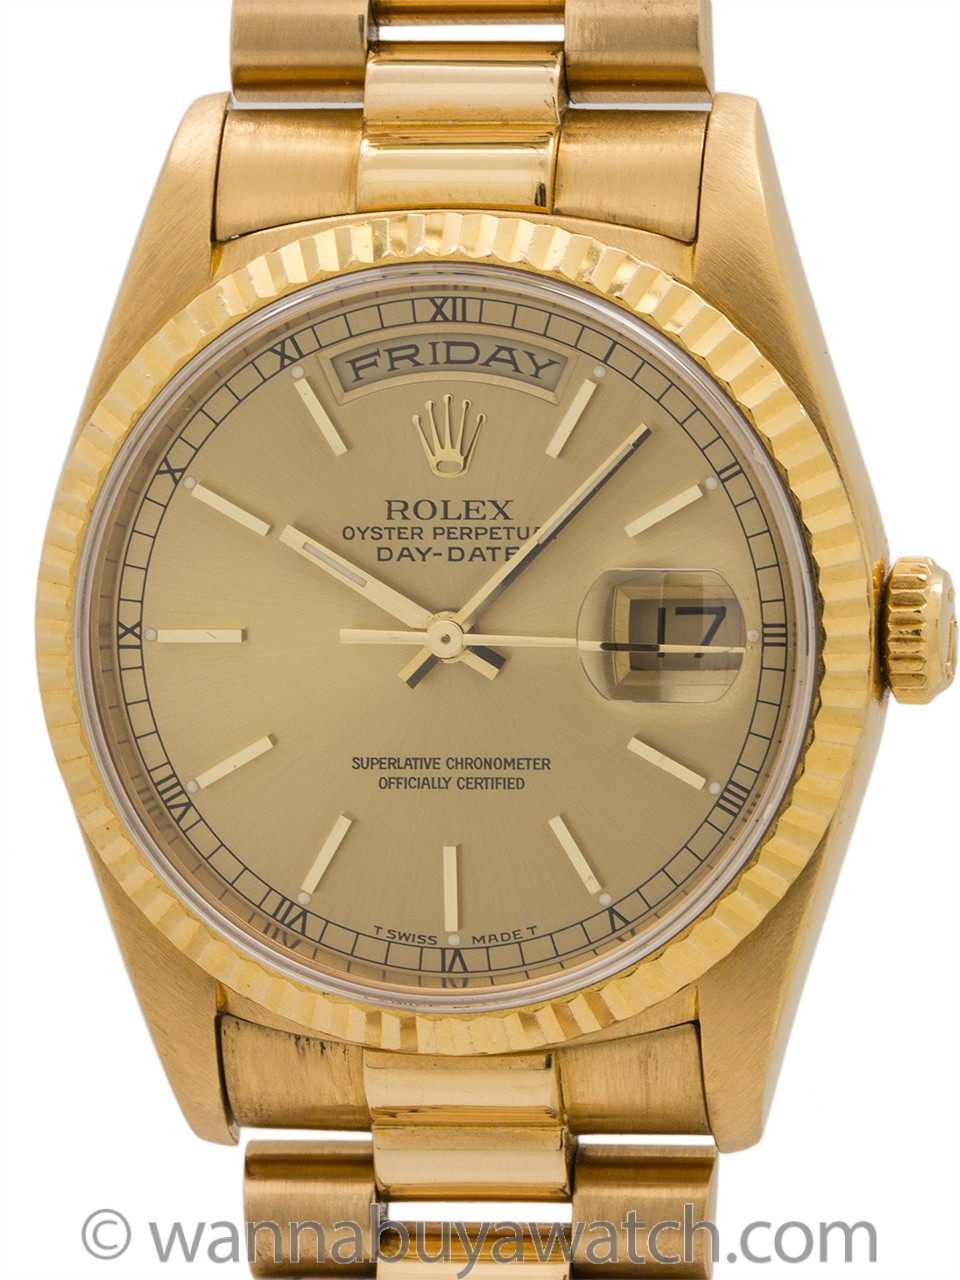 Rolex ref 18238 Day Date President 18K YG “Double Quick” circa 1993